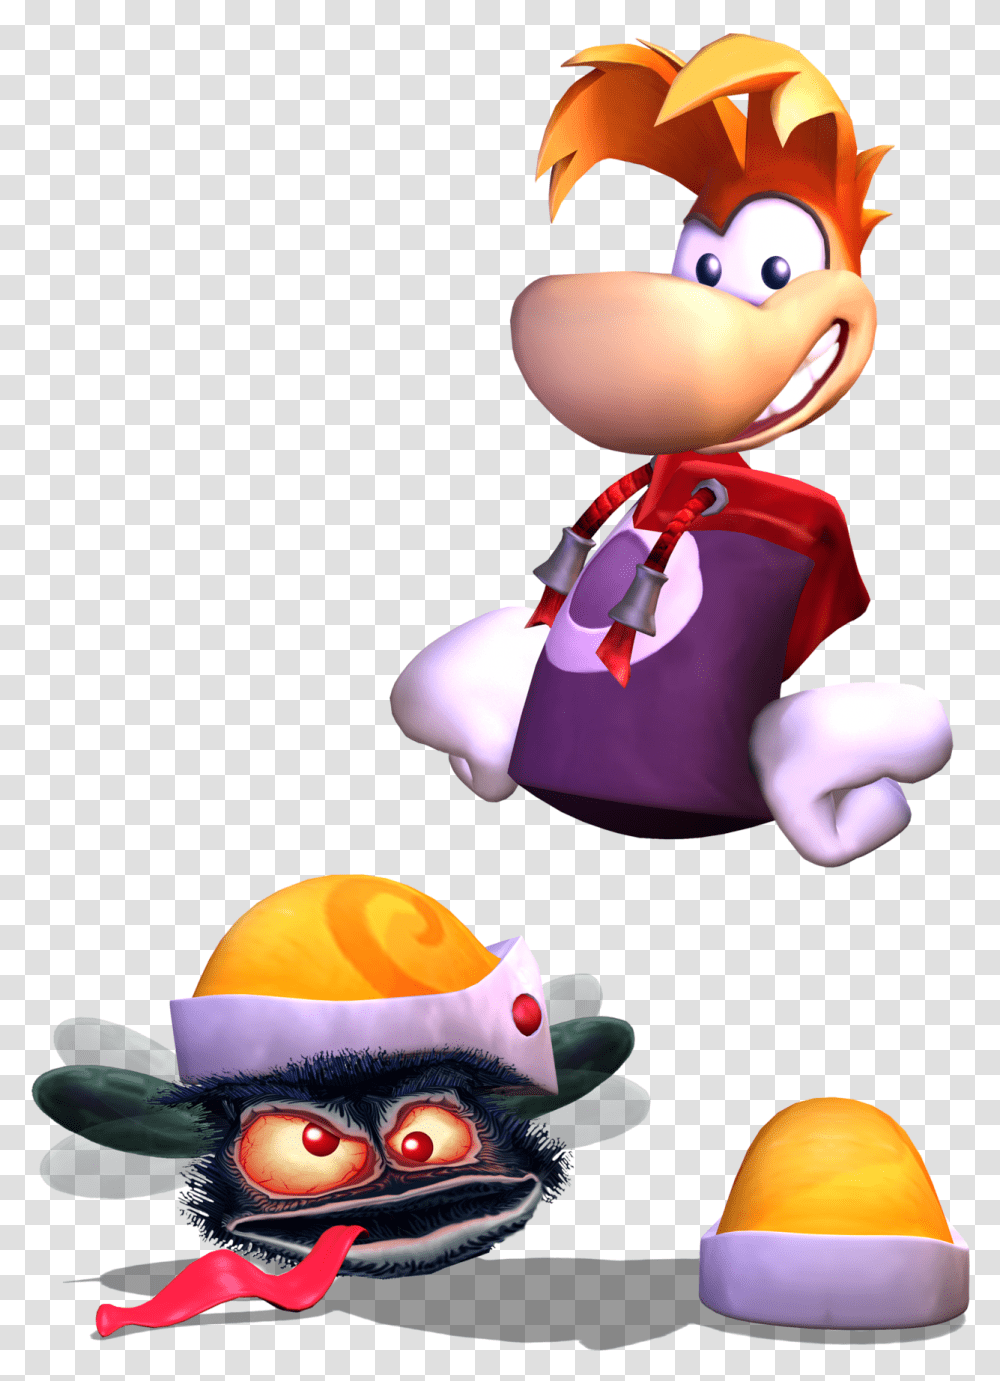 Image Result For Rayman 1 Rayman 3, Toy, Super Mario, Clothing, Apparel Transparent Png